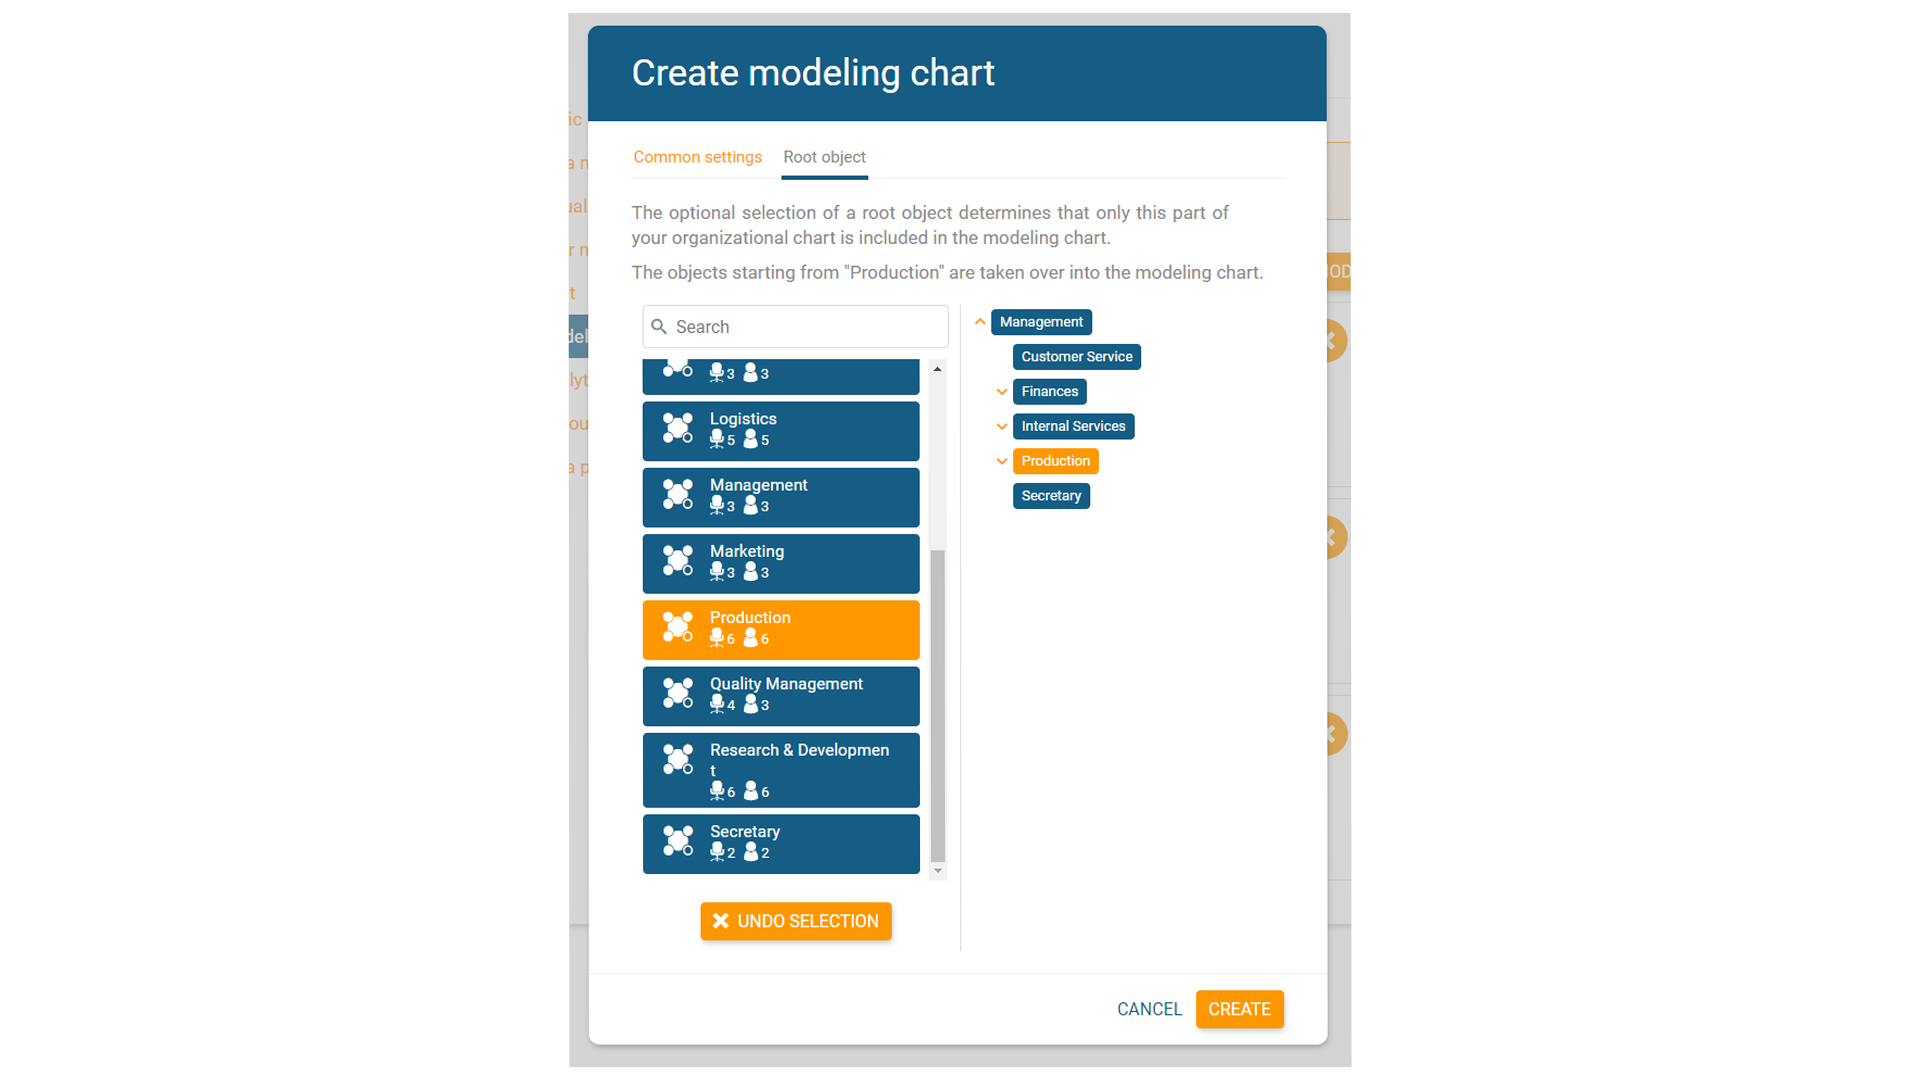 Define a root object for your modeling chart in orginio